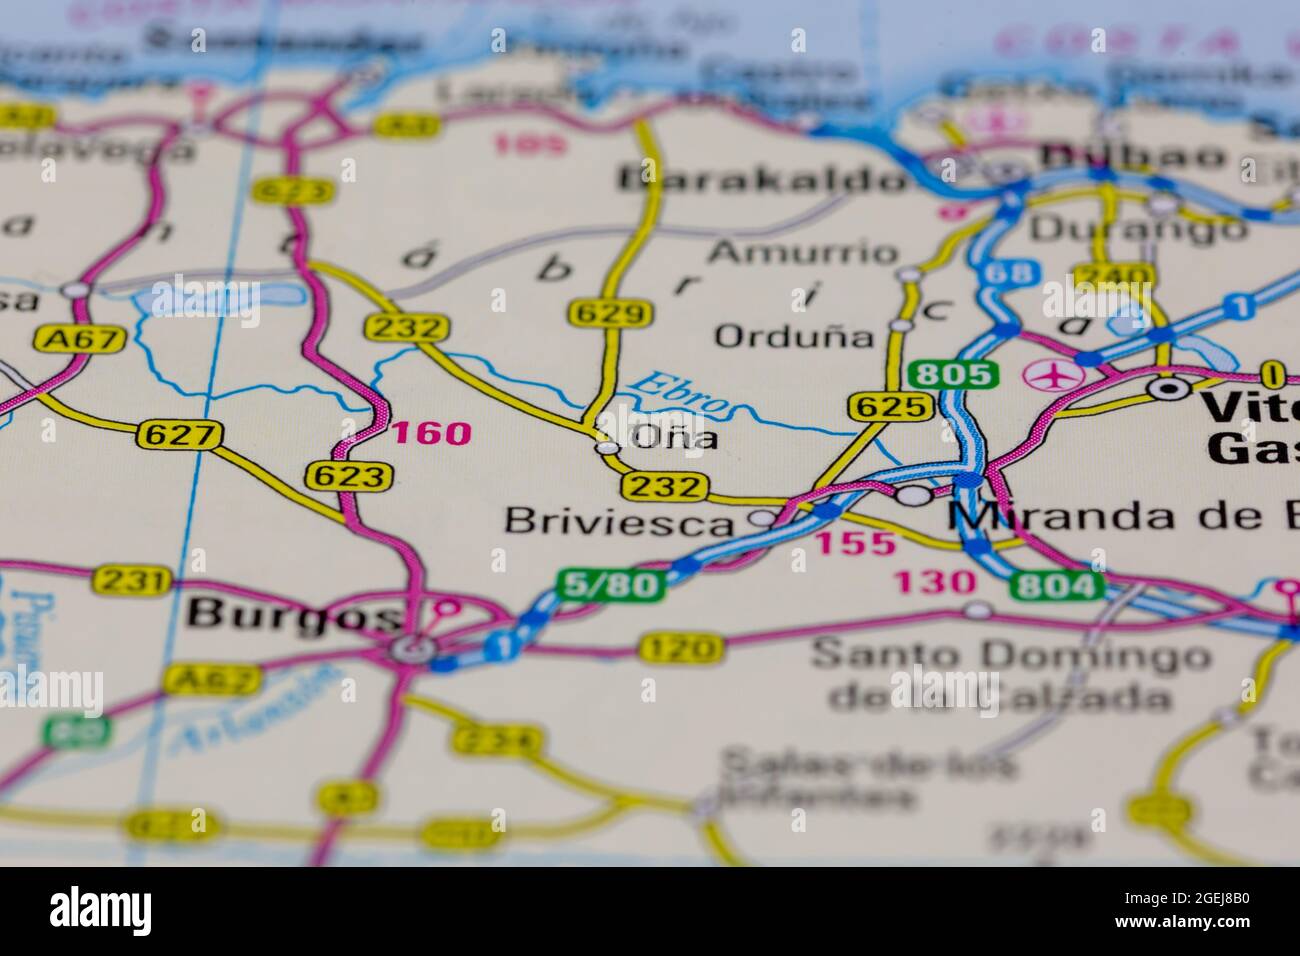 Ona Spain shown on a road map or Geography map Stock Photo